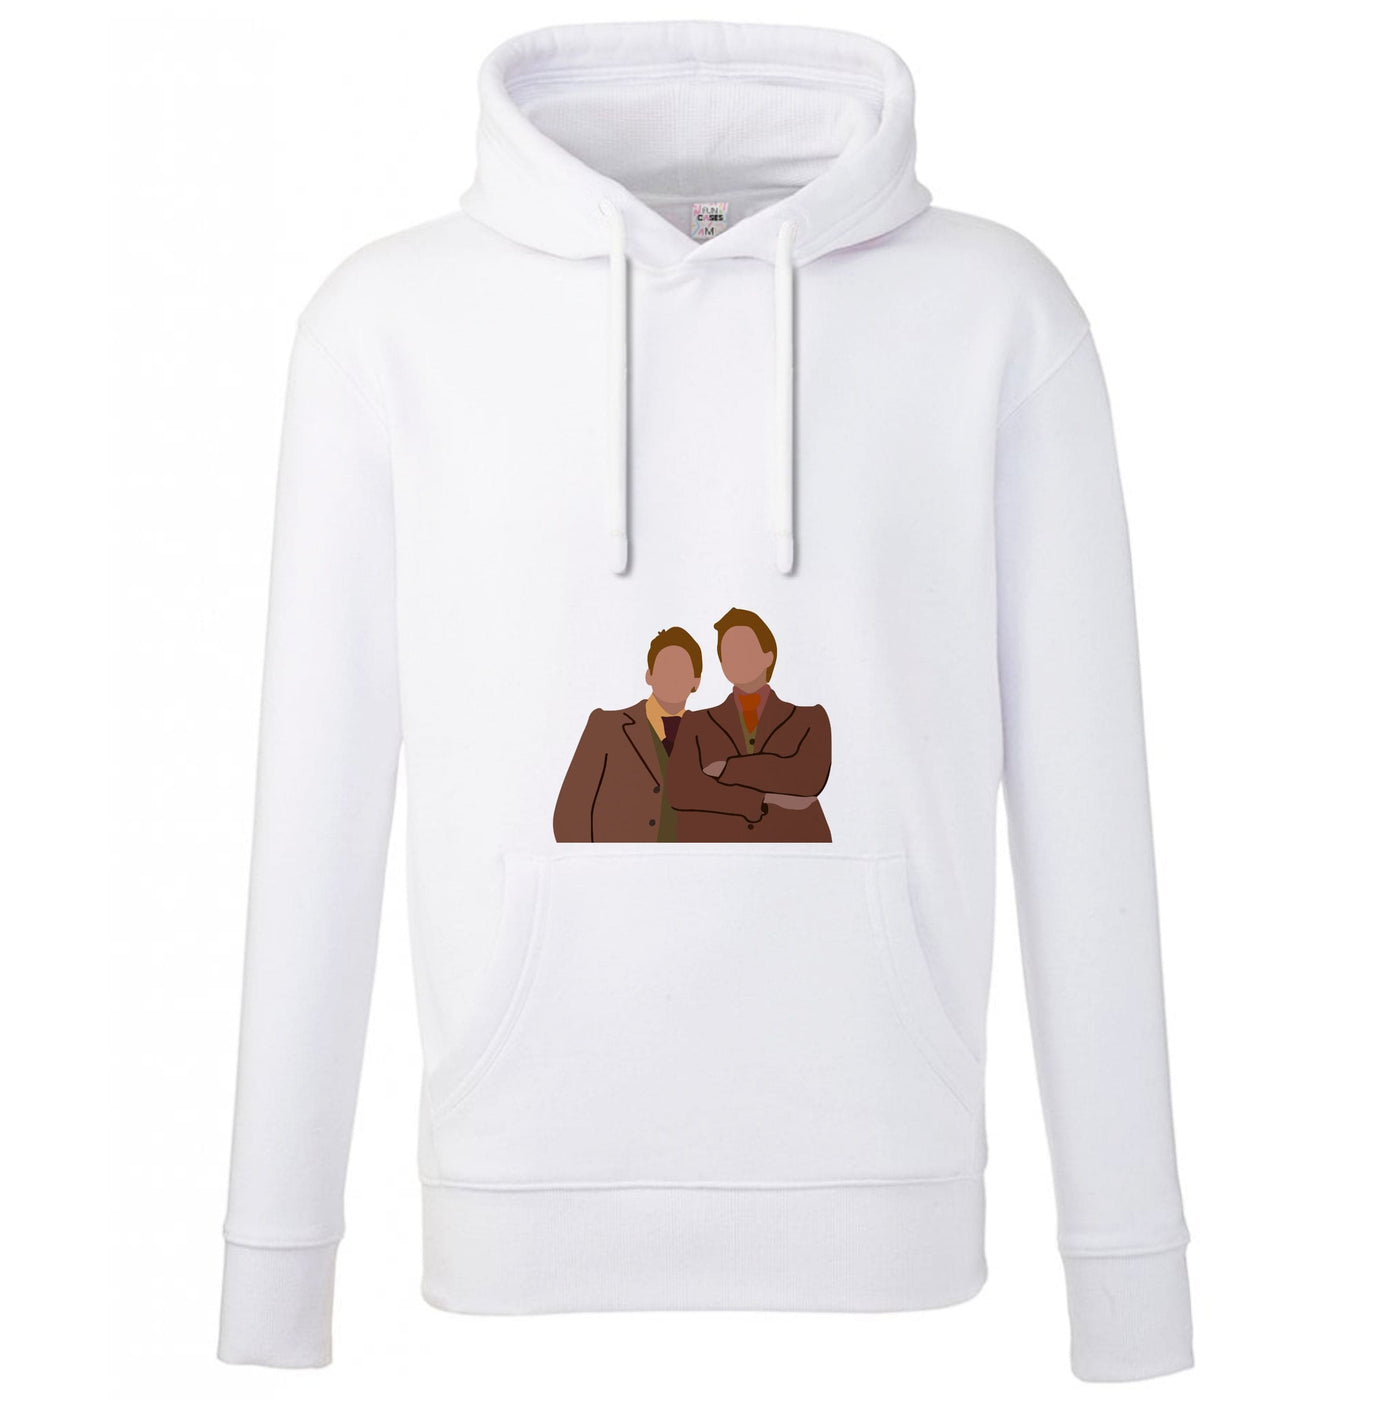 Fred And George - Harry Potter Hoodie